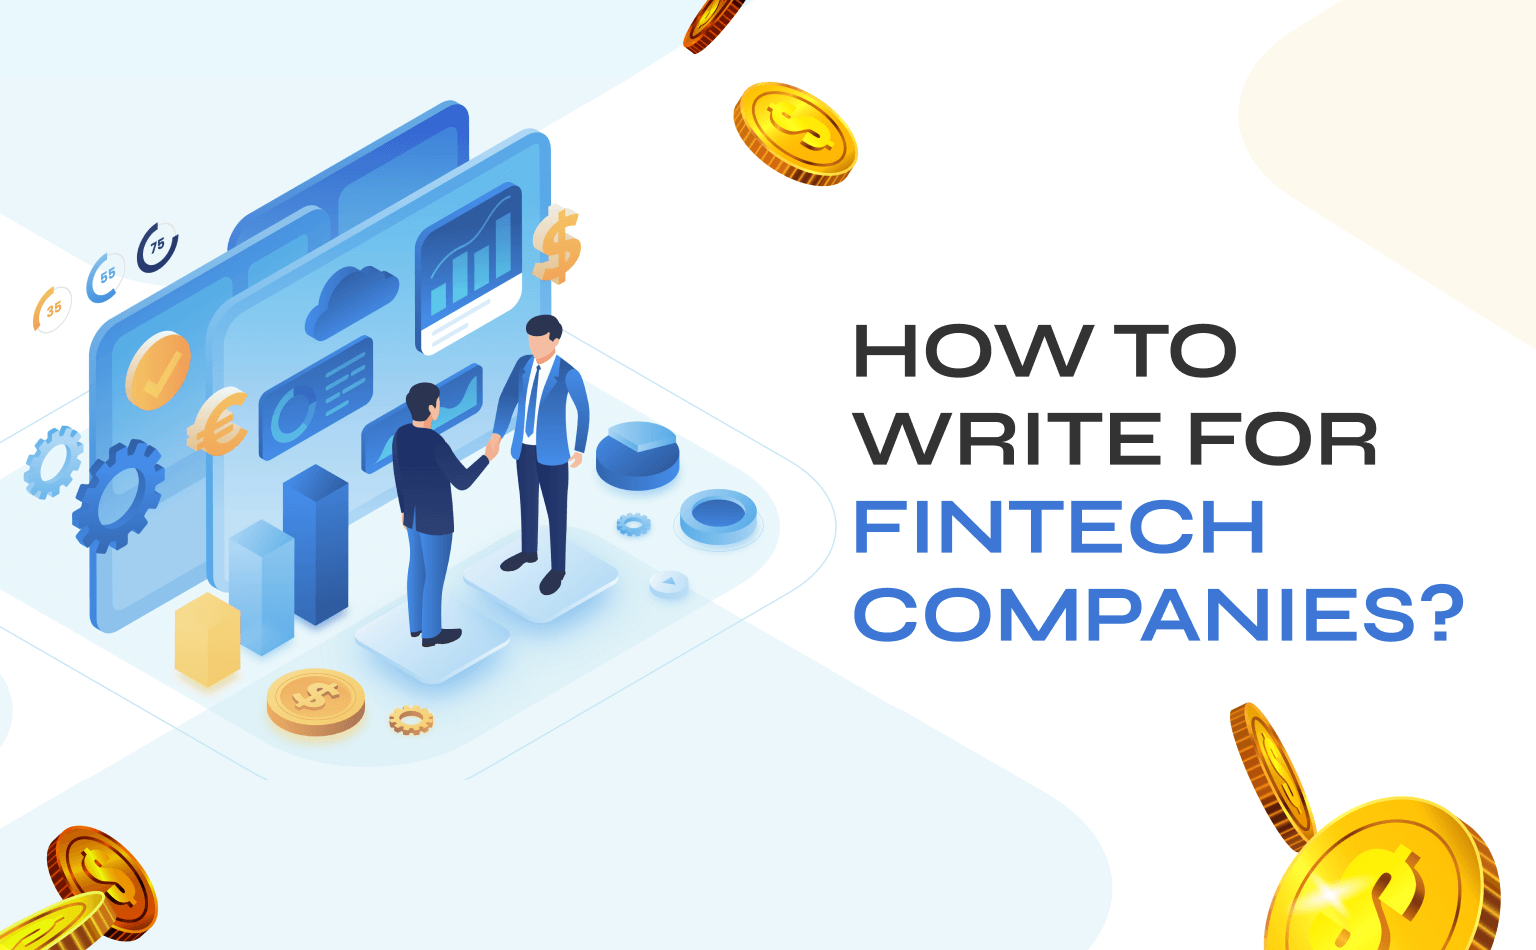 How to Write for Fintech Companies